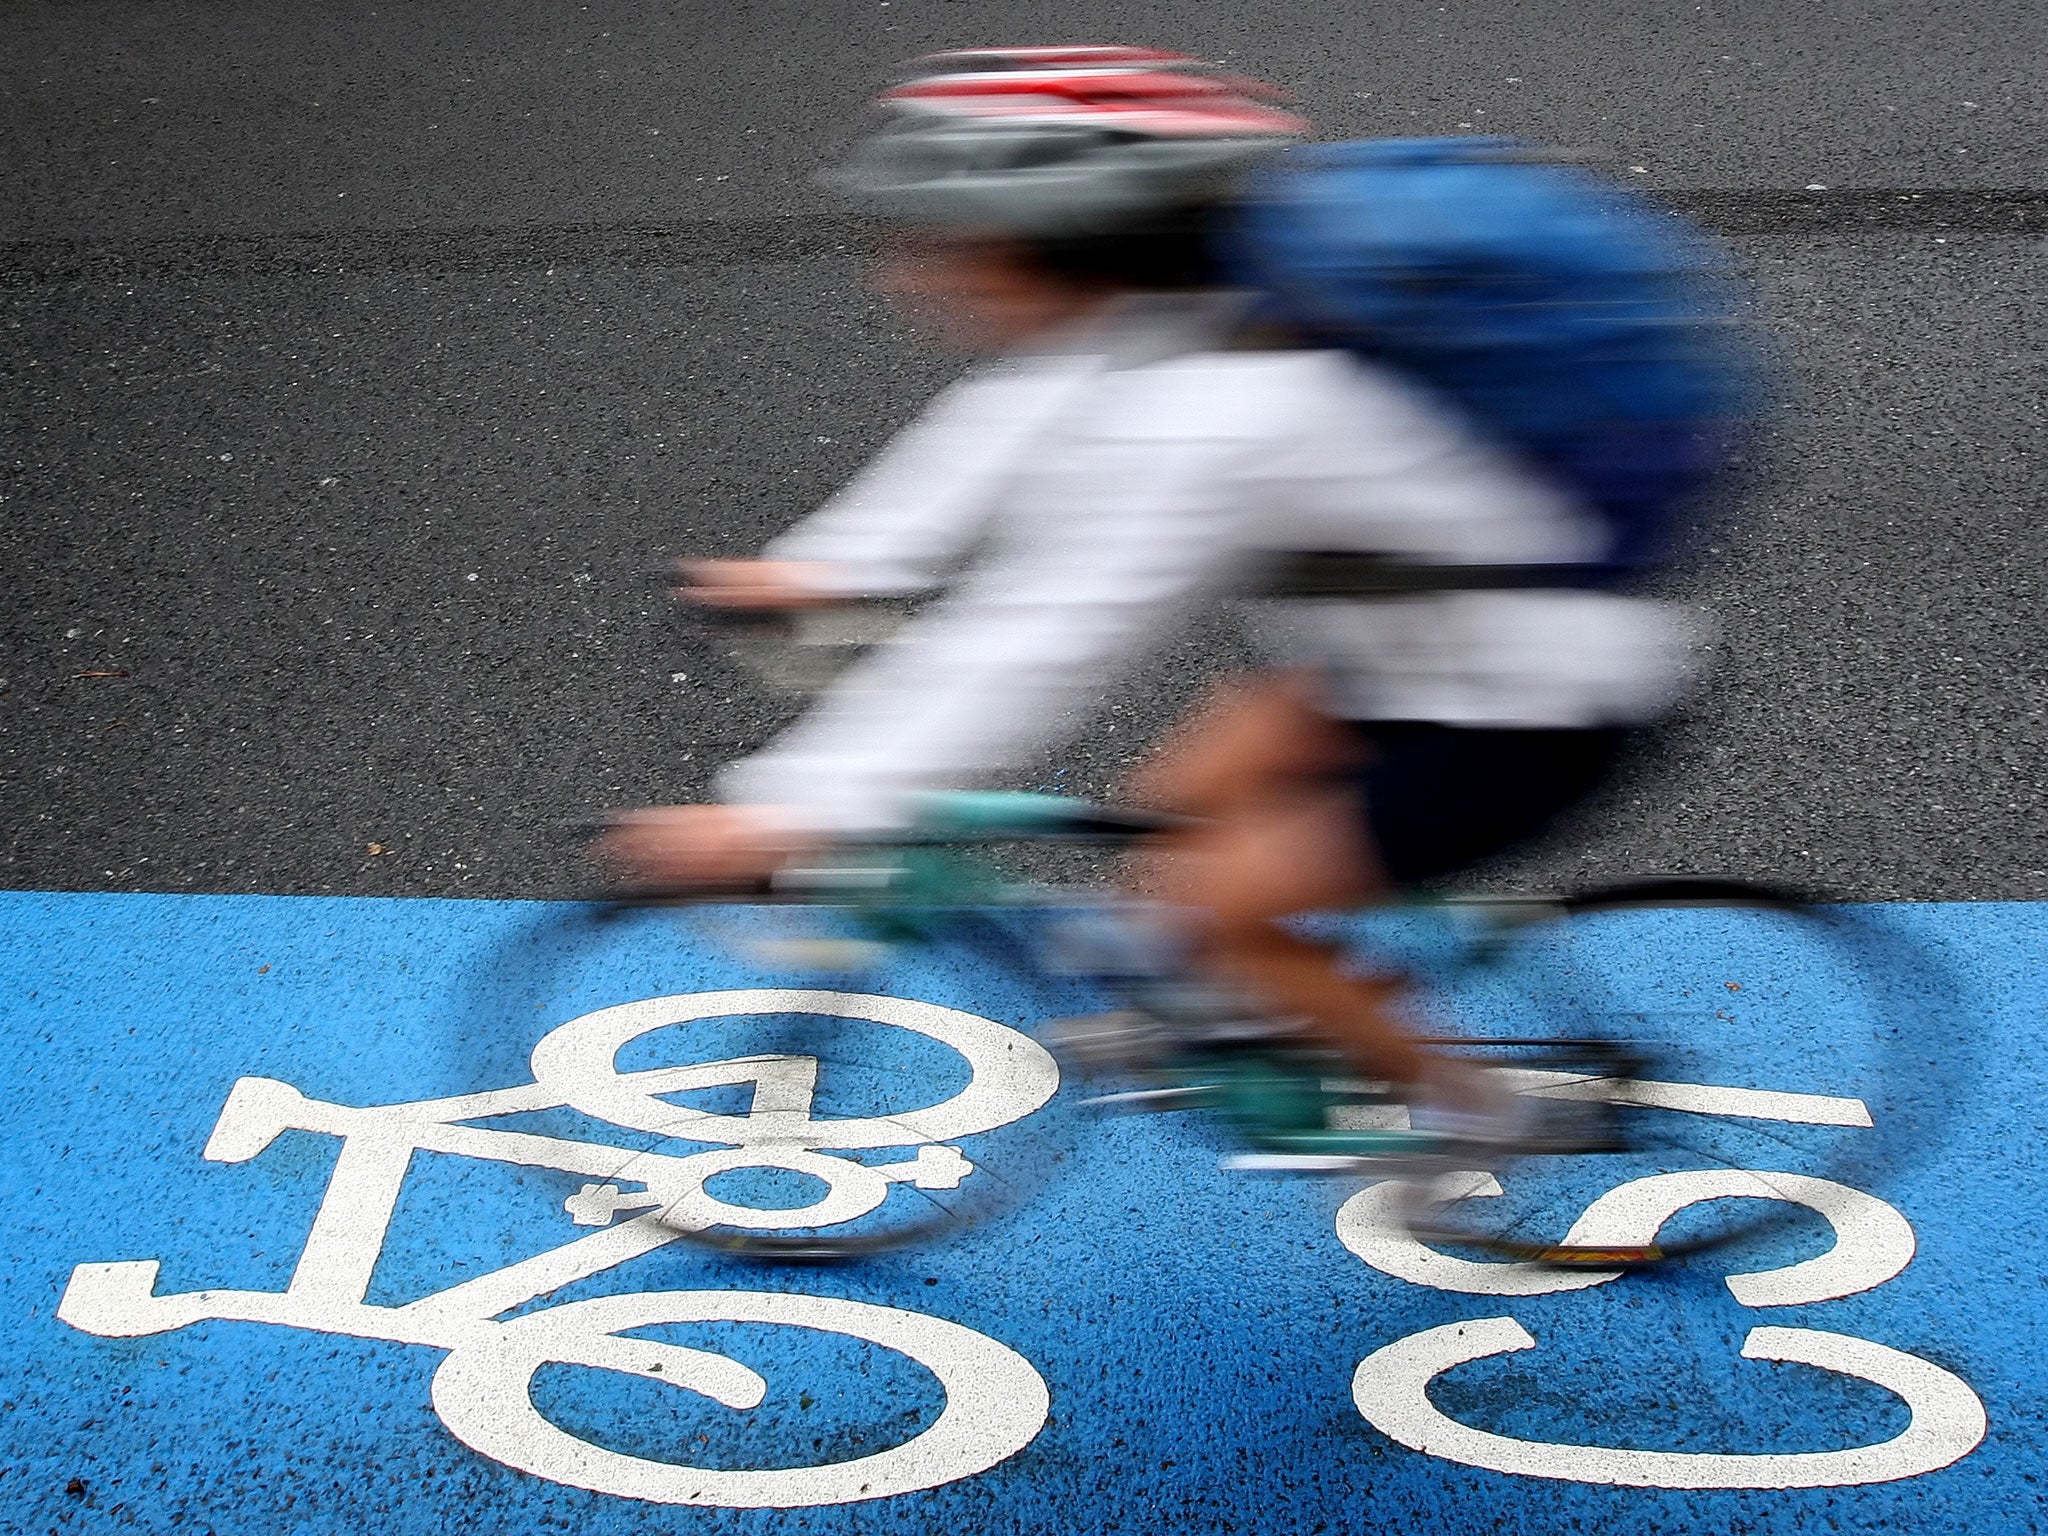 45 per cent of people support installing dedicated cycle lanes on all roads, the survey found